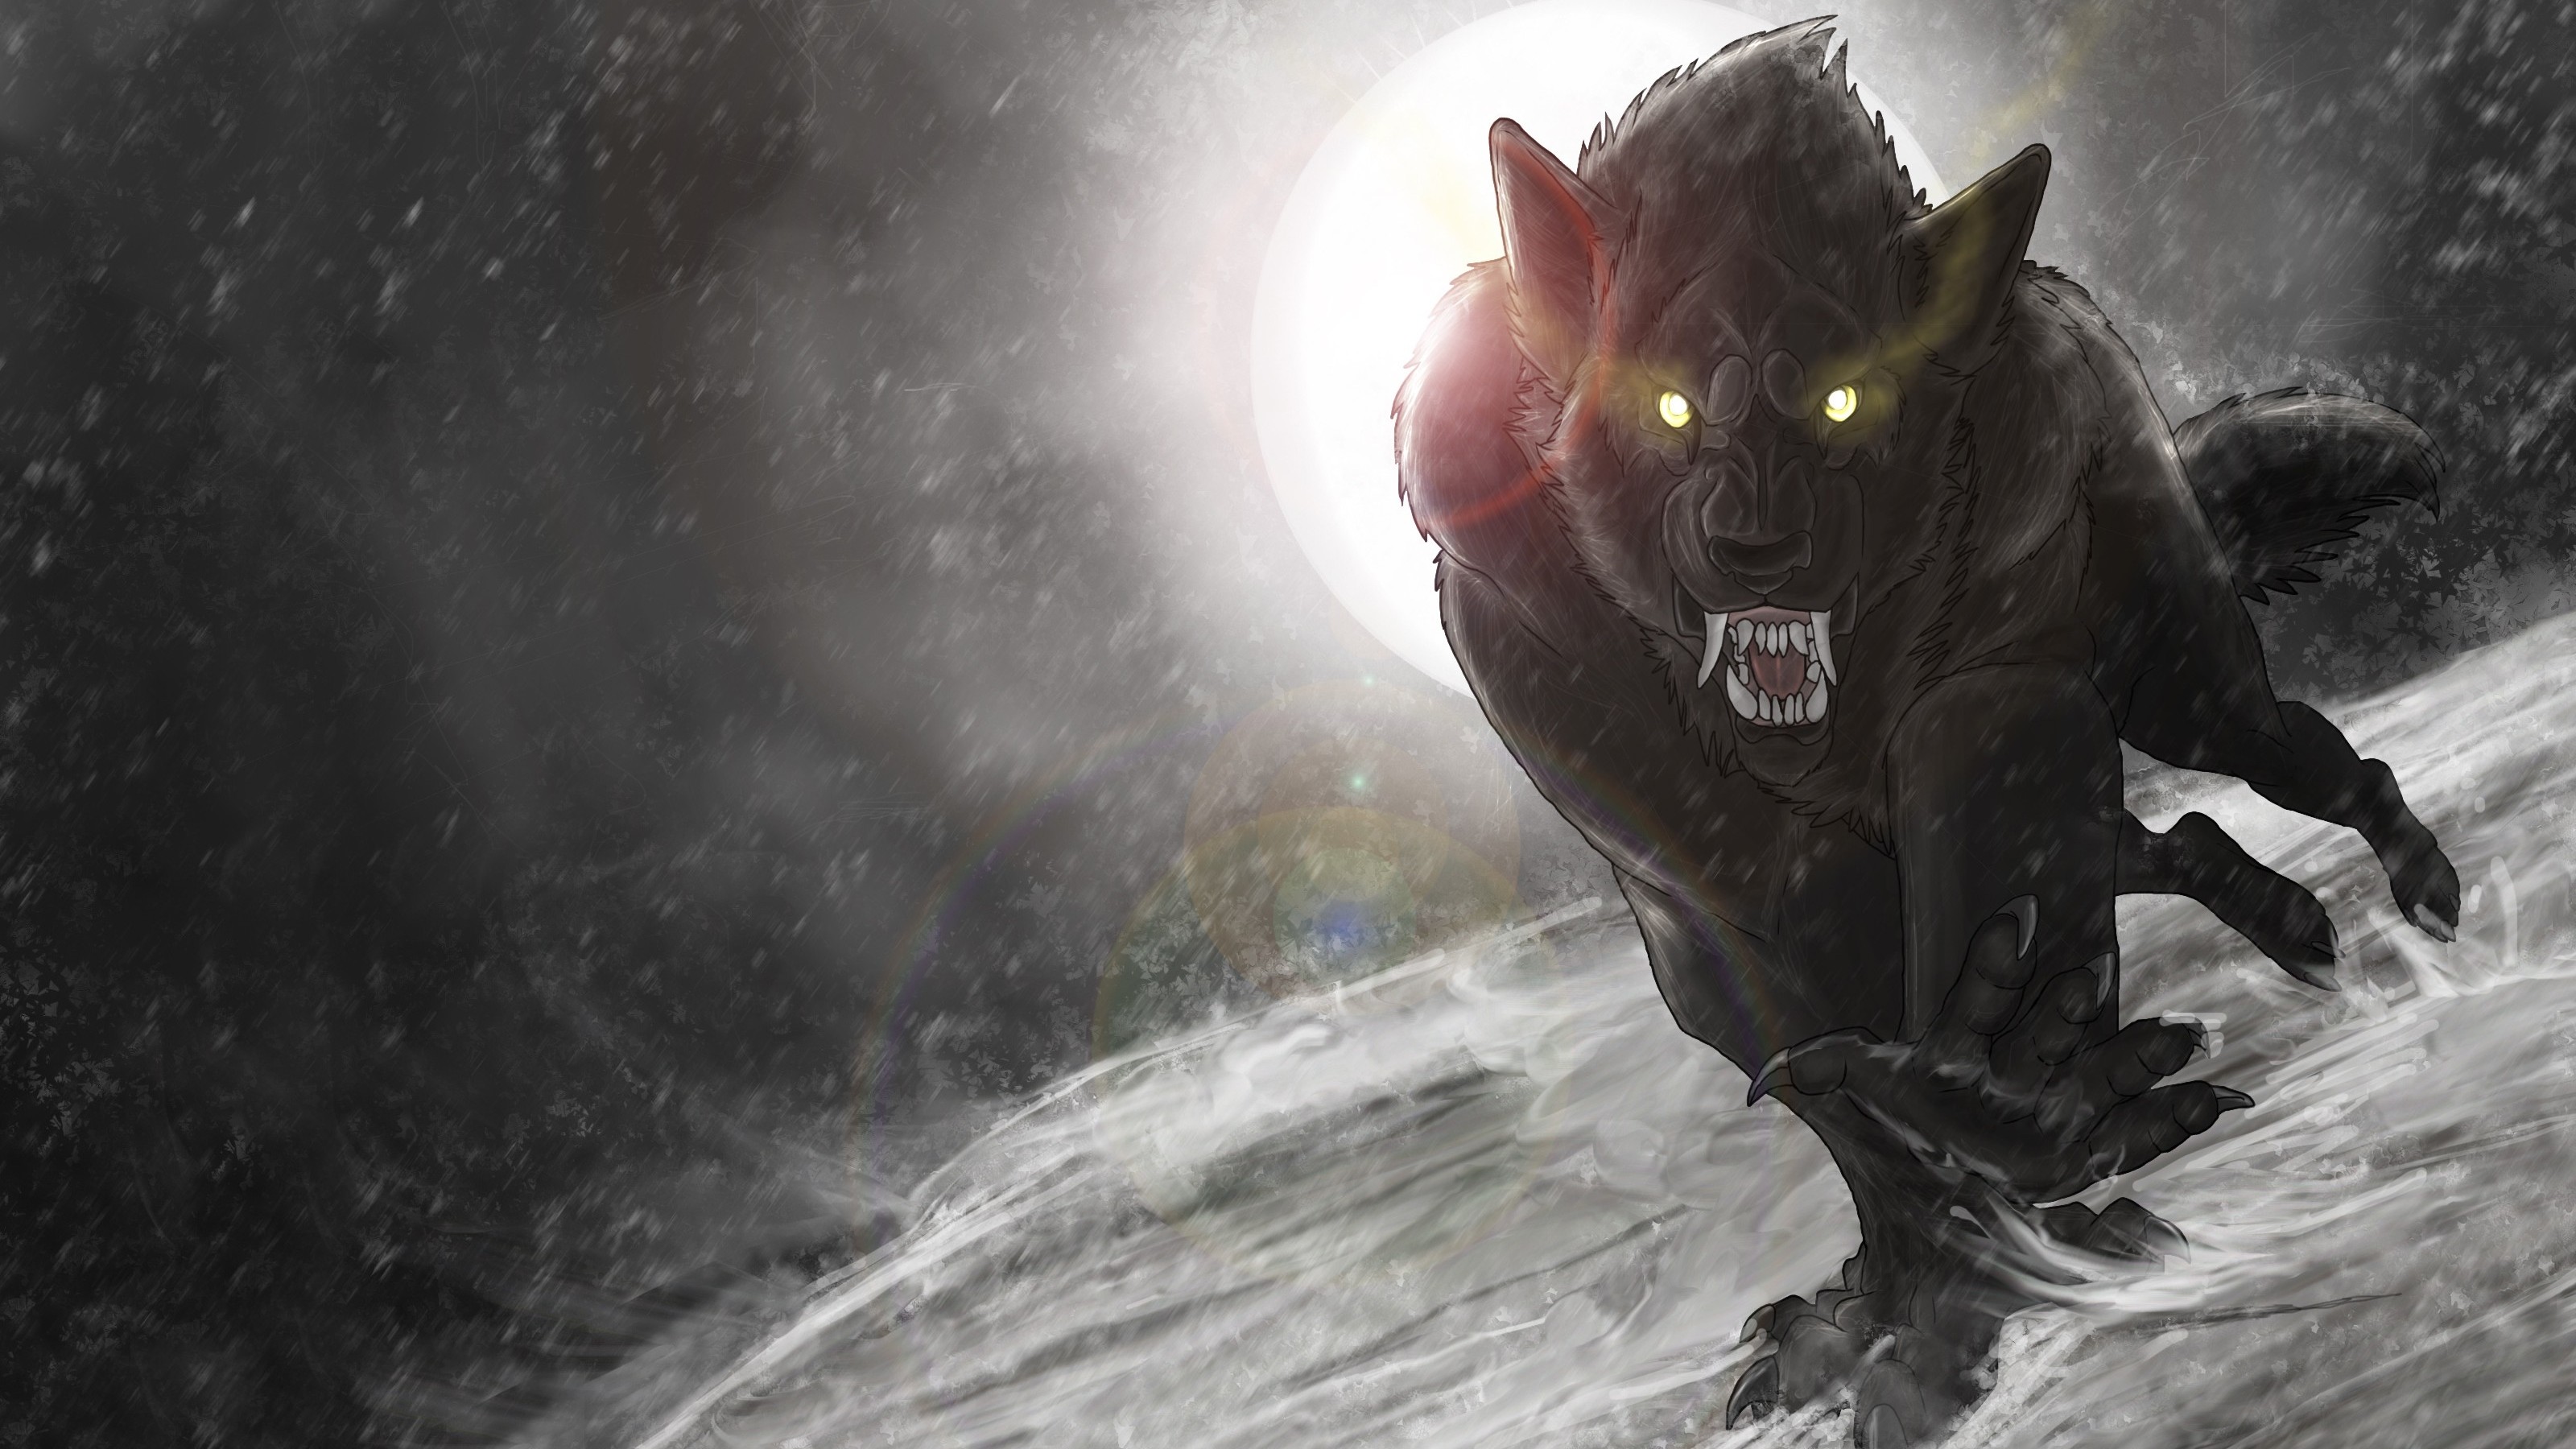 3200x1800 images of werewolves Werewolf HD Wallpaper Background For